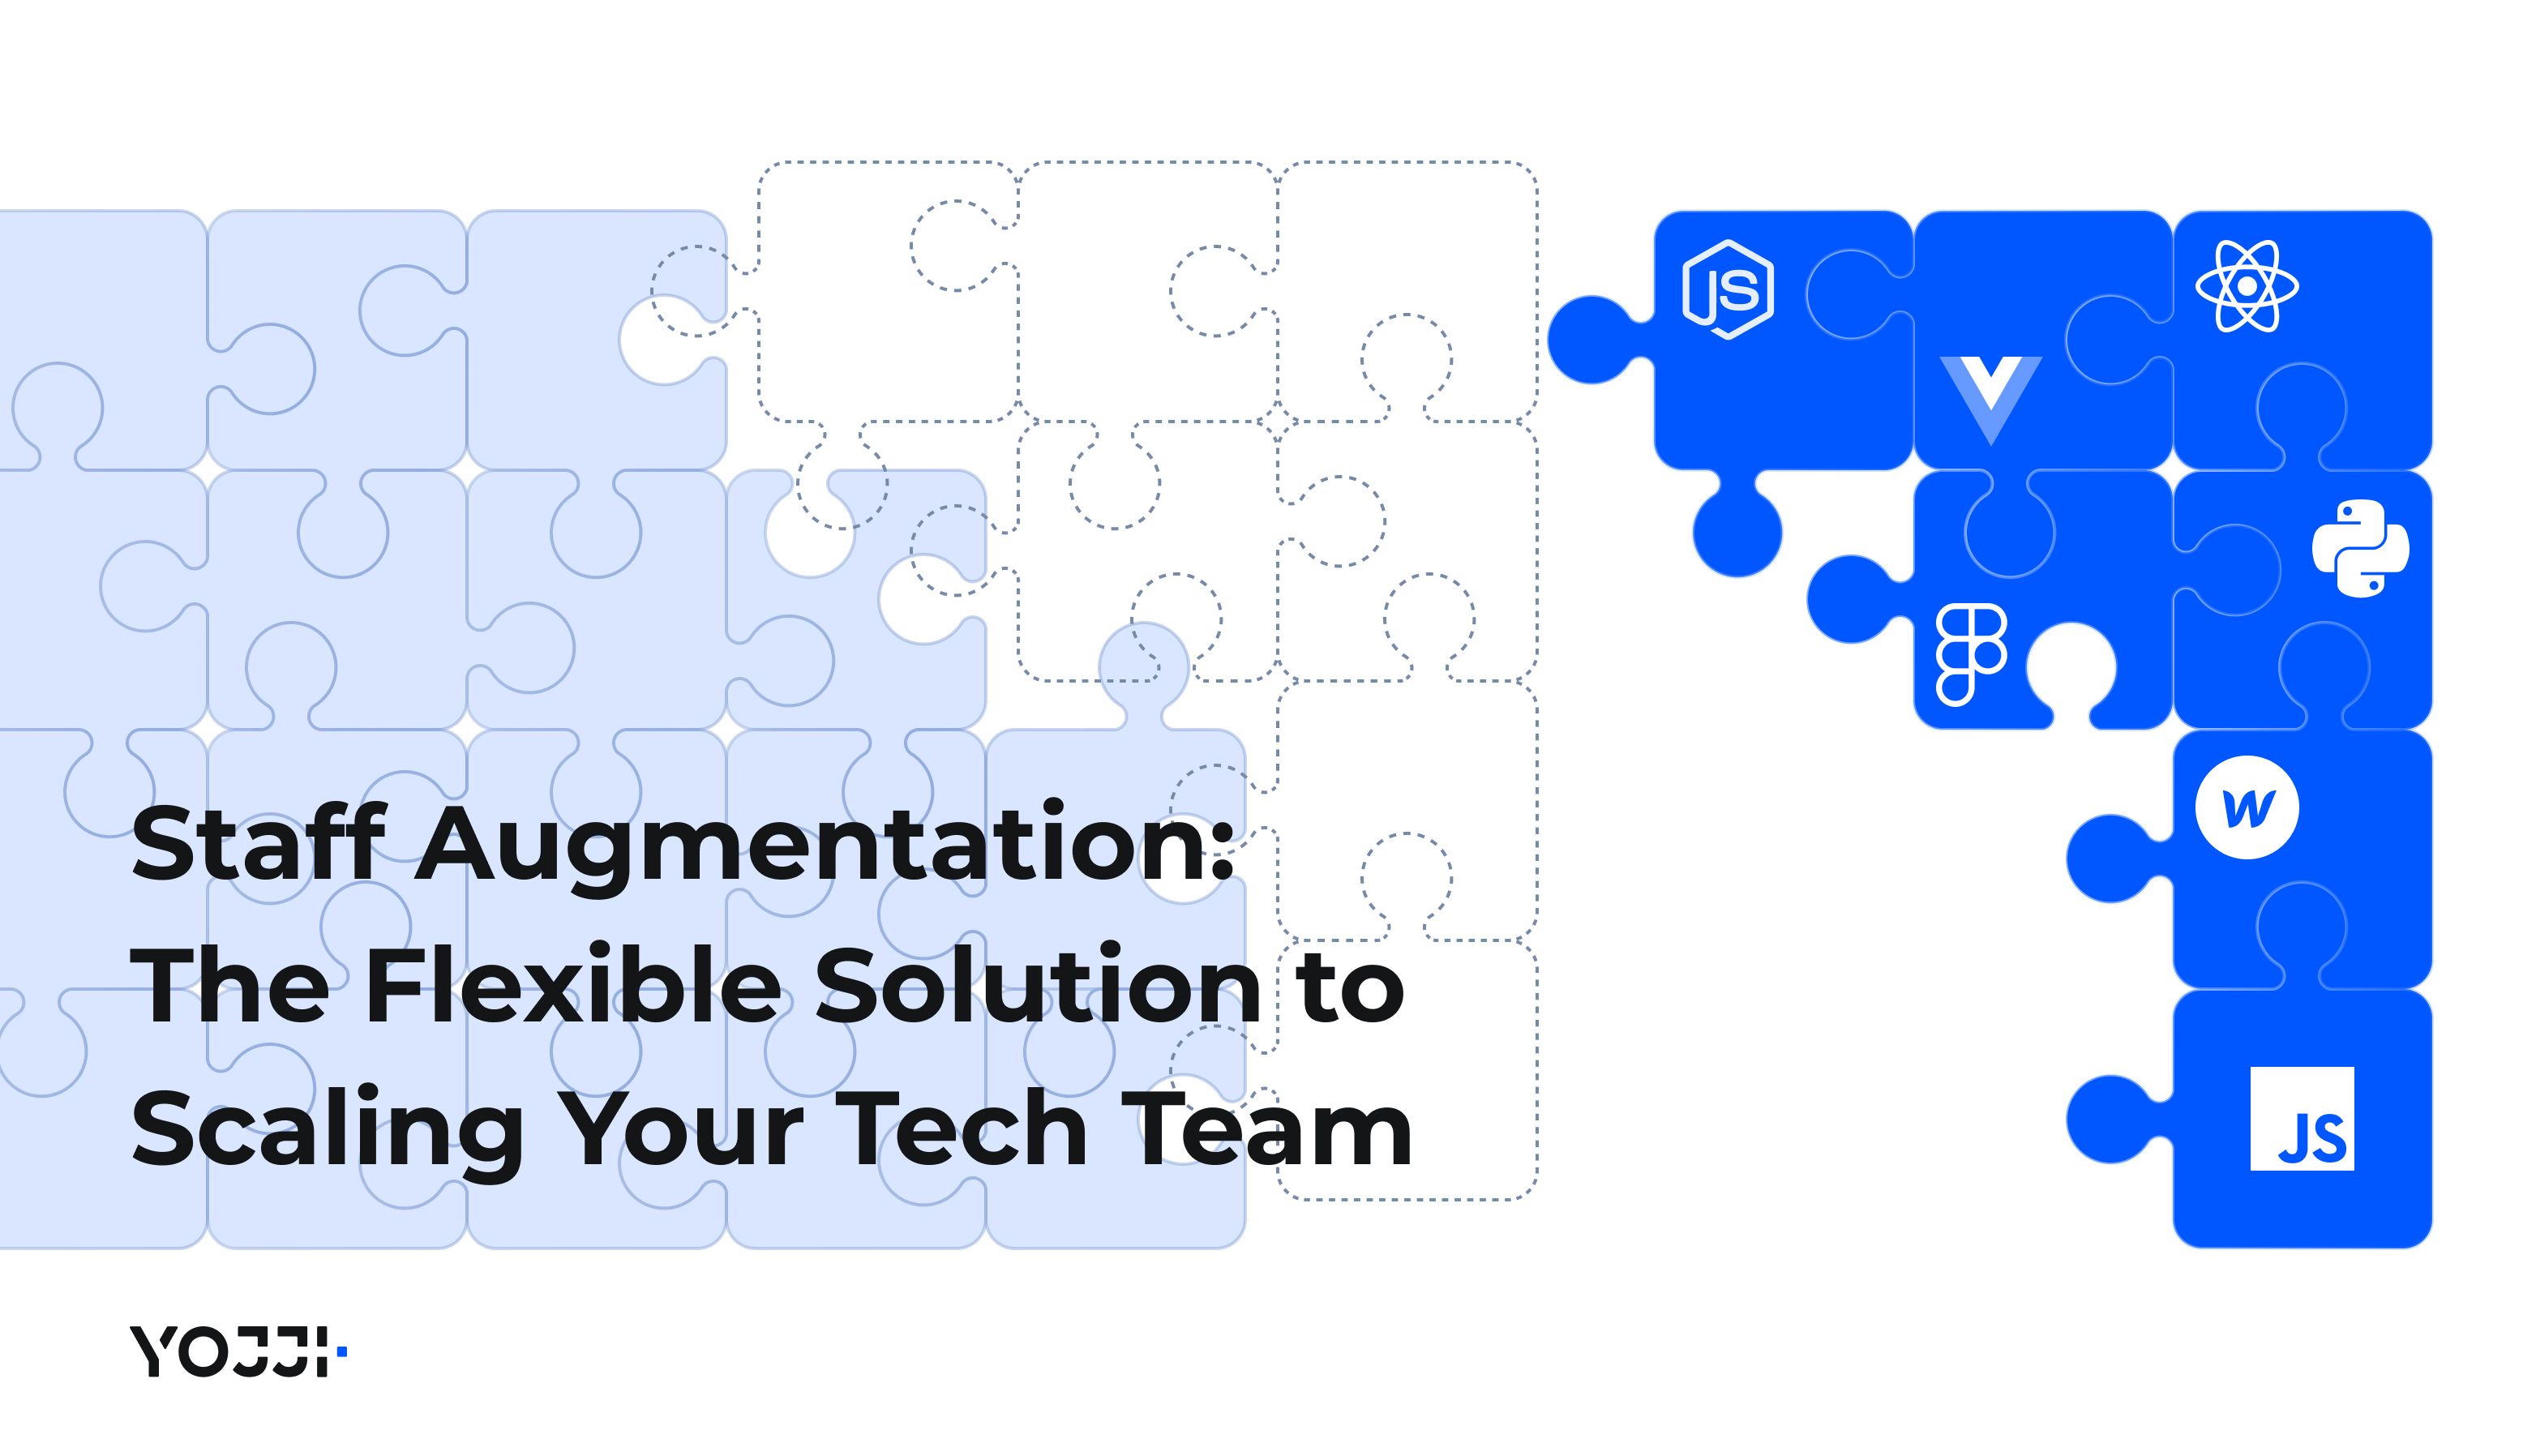 Staff Augmentation The flexible solution to scaling your tech team